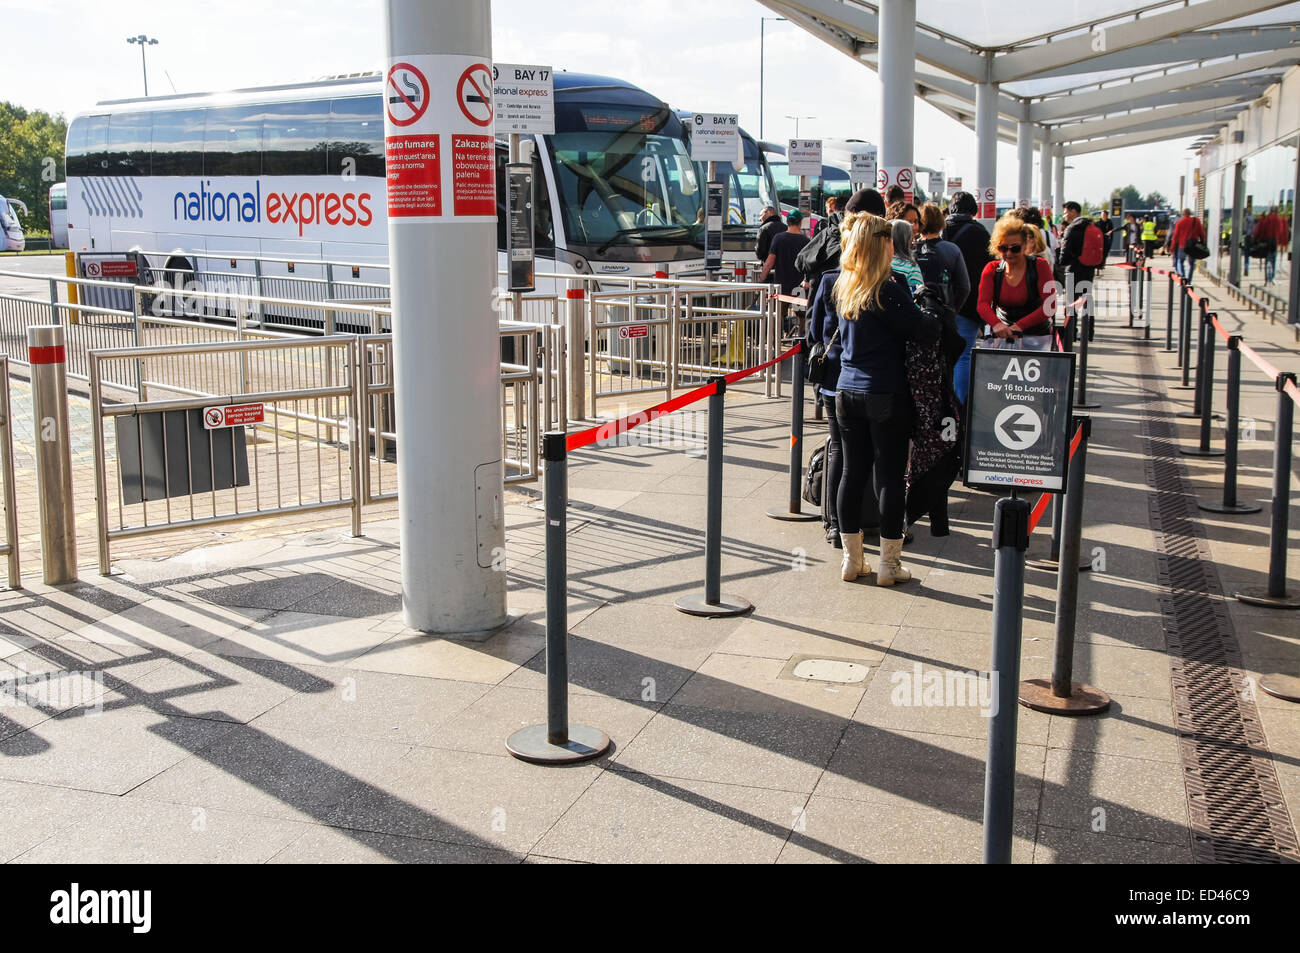 Travelers wait in a queue before boarding National Express bus at Stock  Photo - Alamy